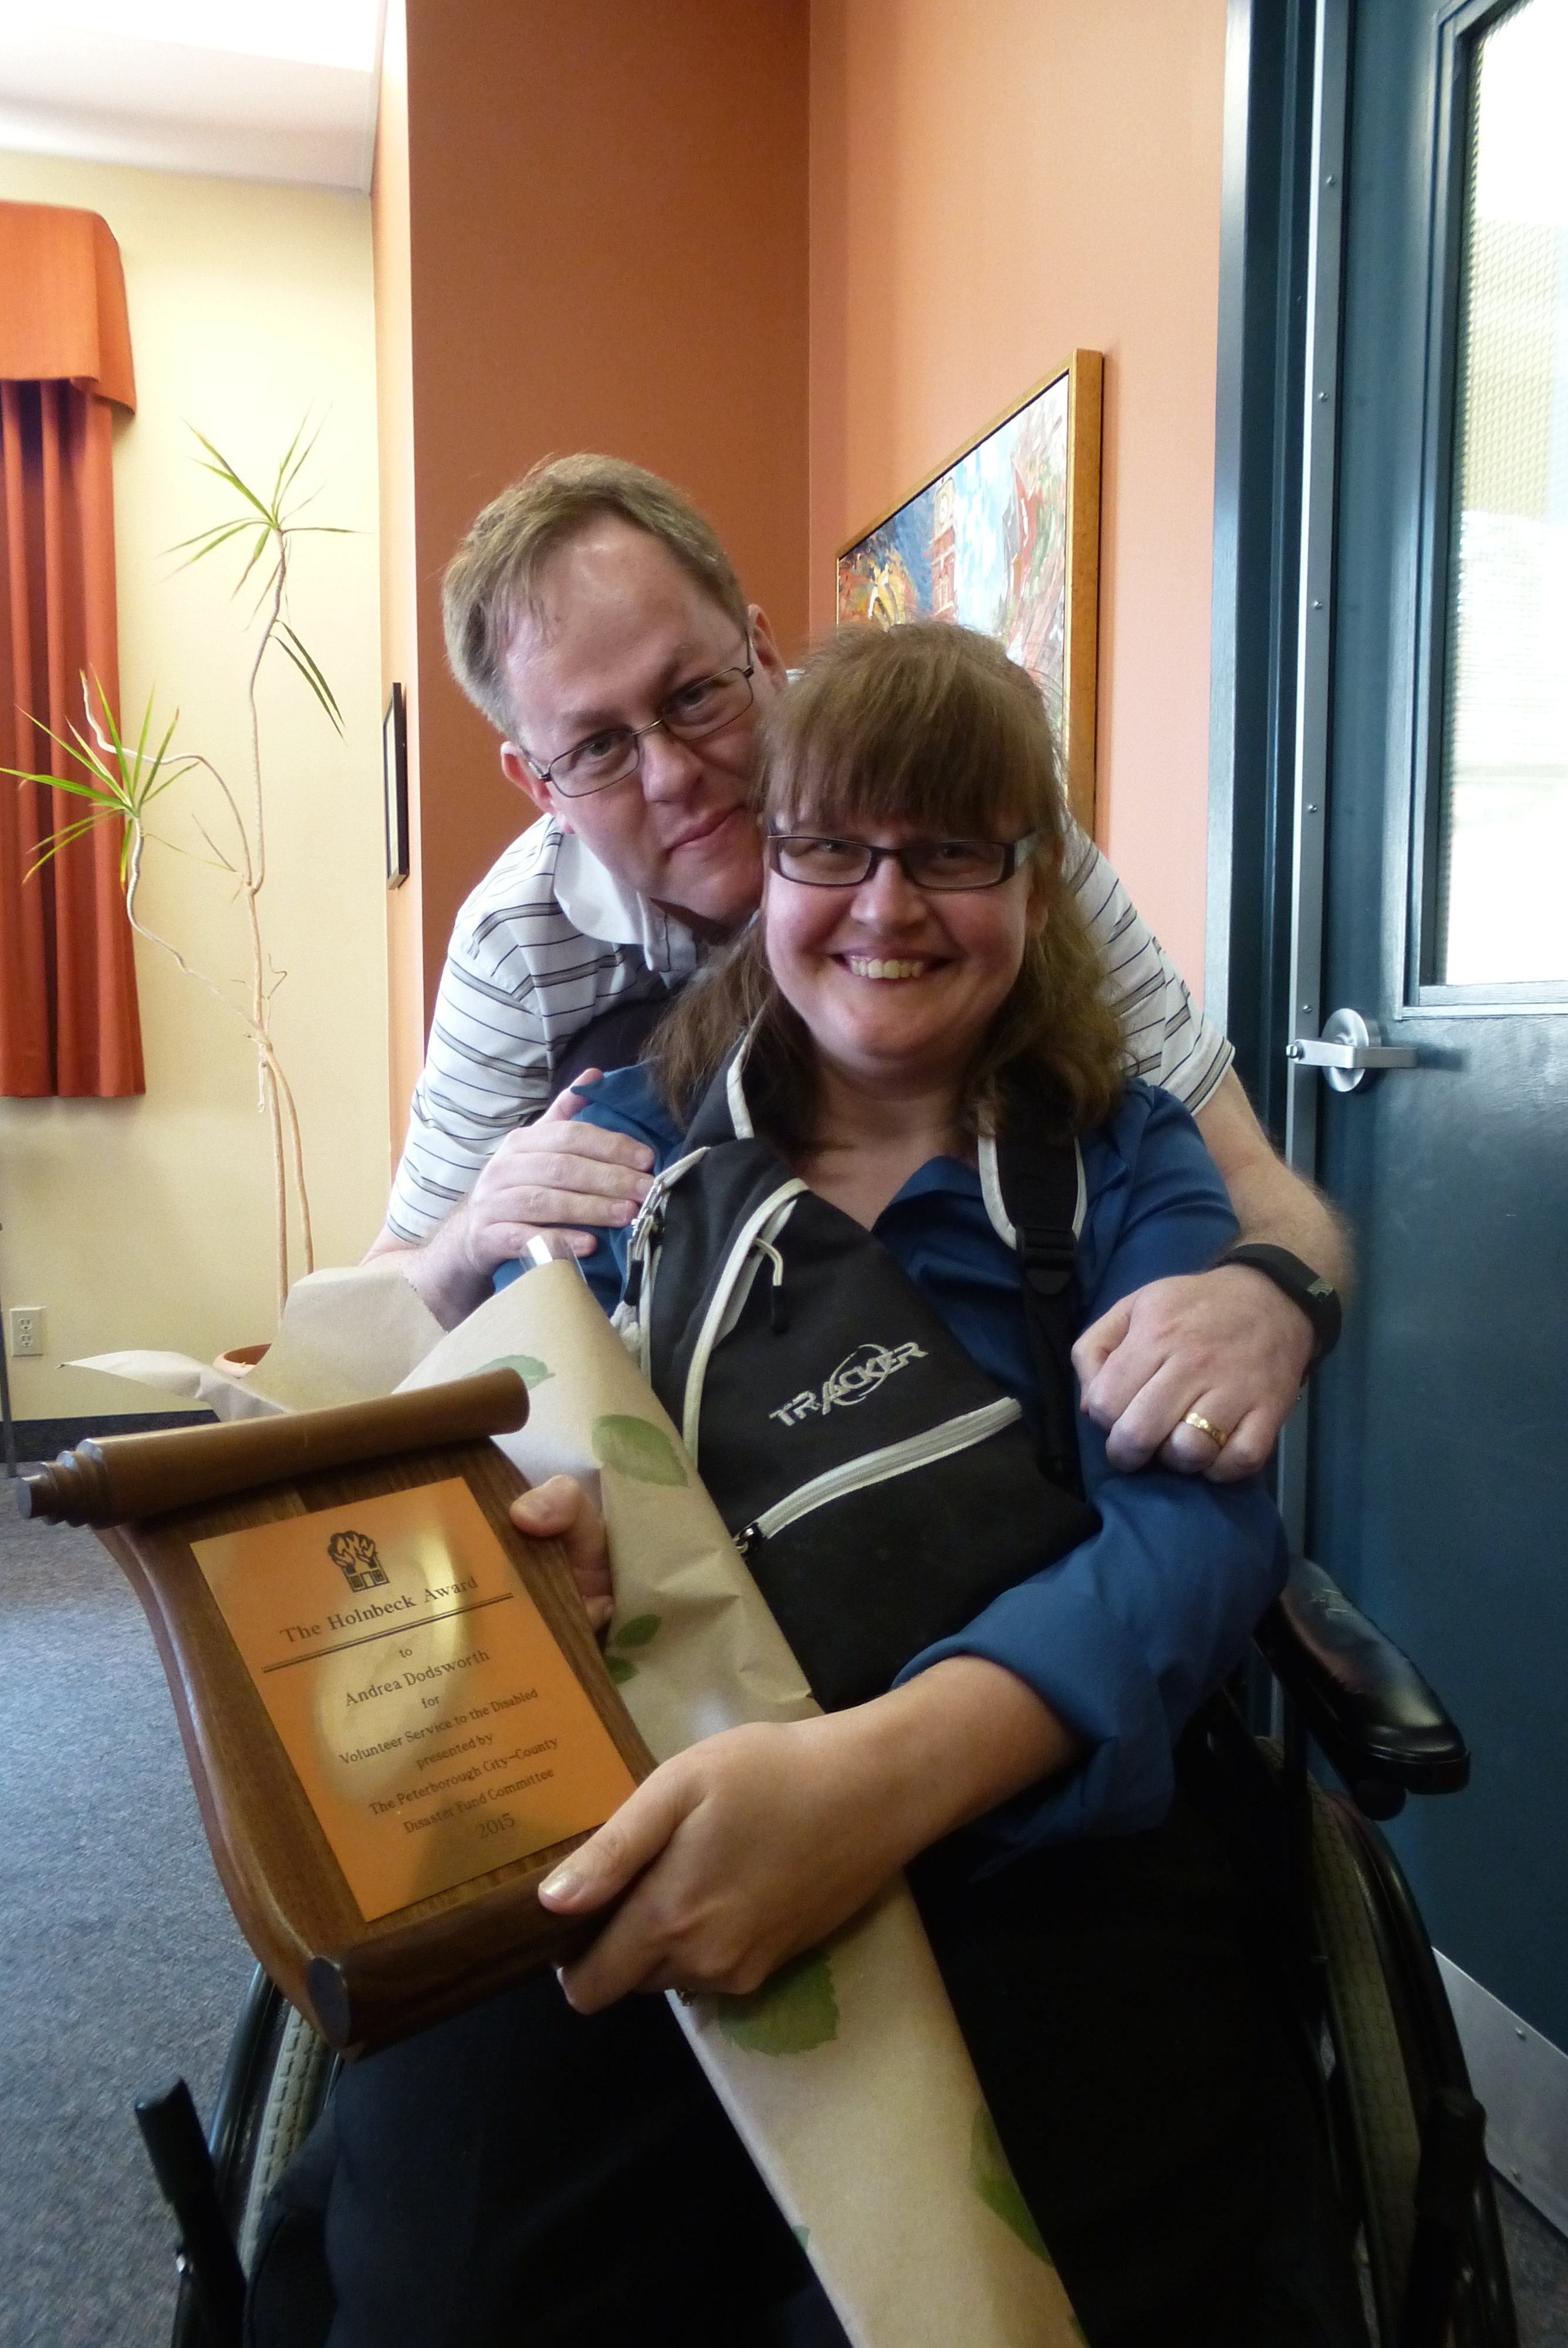 Photo of Andrea Dodsworth proudly displaying her Holnbeck Award with her husband Marc.